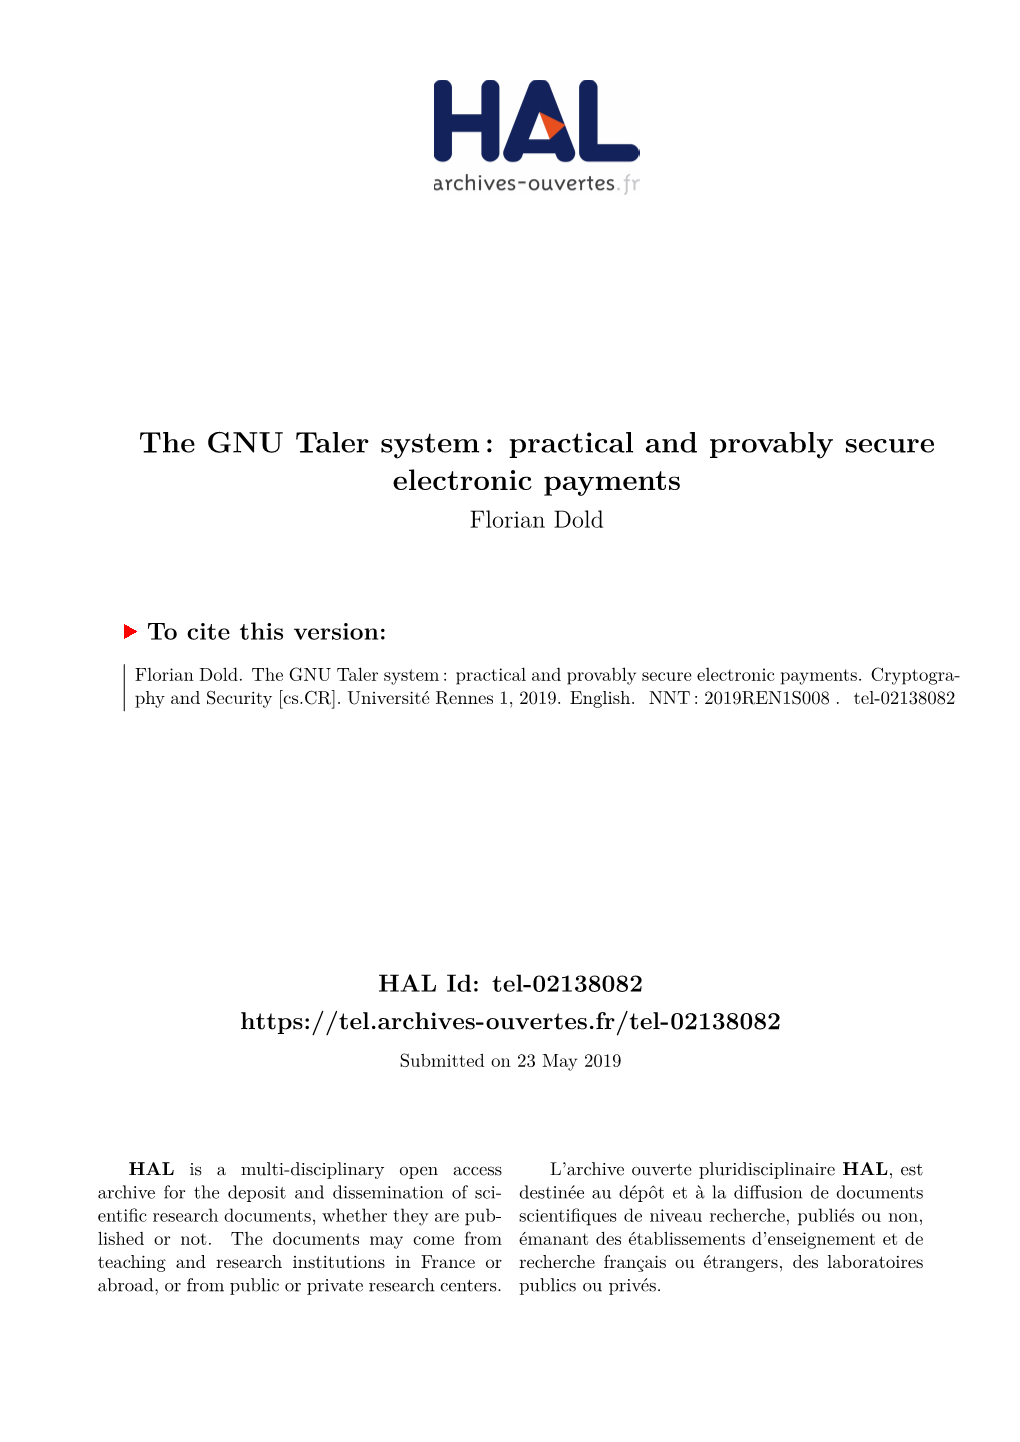 The GNU Taler System: Practical and Provably Secure Electronic Payments